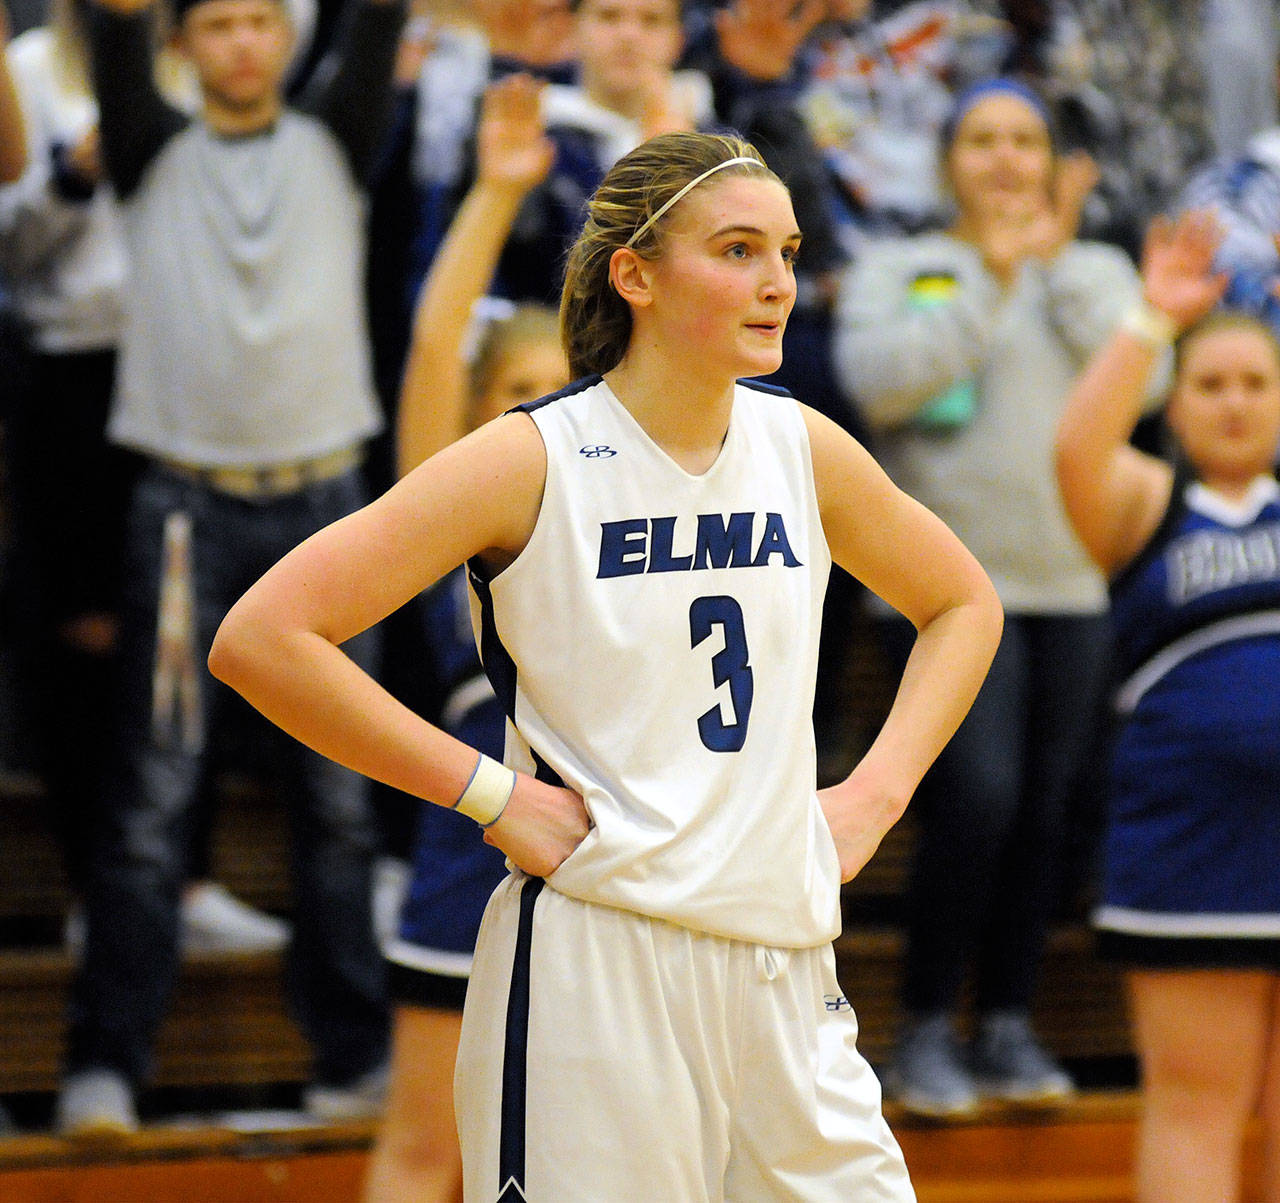 Elma center Jalyn Sackrider, seen here in a Daily World file photo, was named the 1A Evergreen League’s MVP on Tuesday after leading the Eagles to a league and district championship this season. (Ryan Sparks | Grays Harbor News Group)